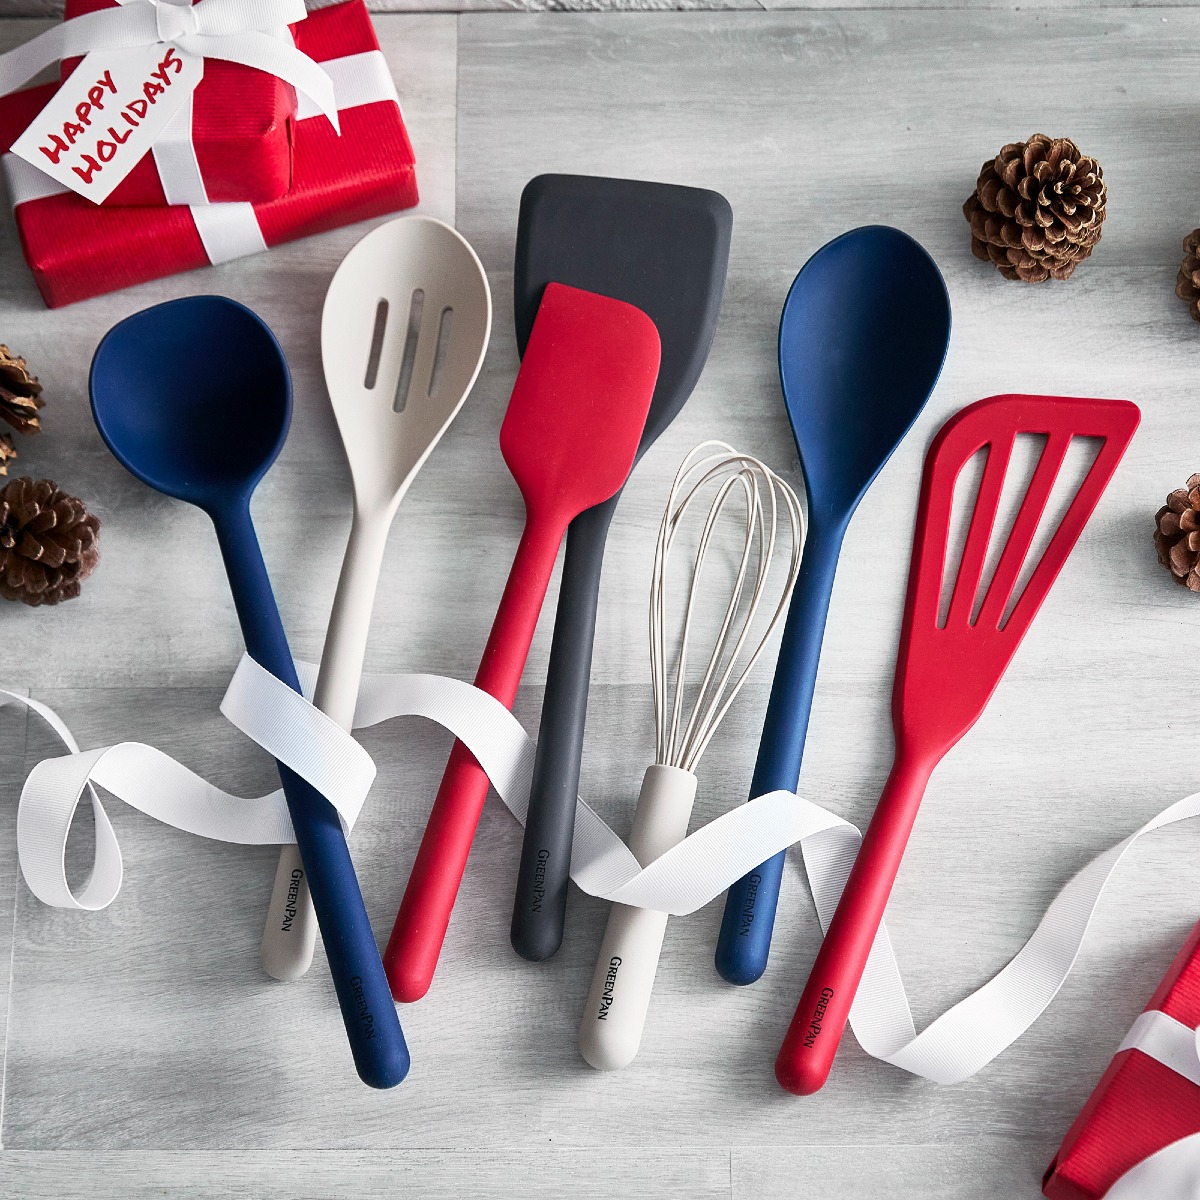 Cook's Tools: 40% Off